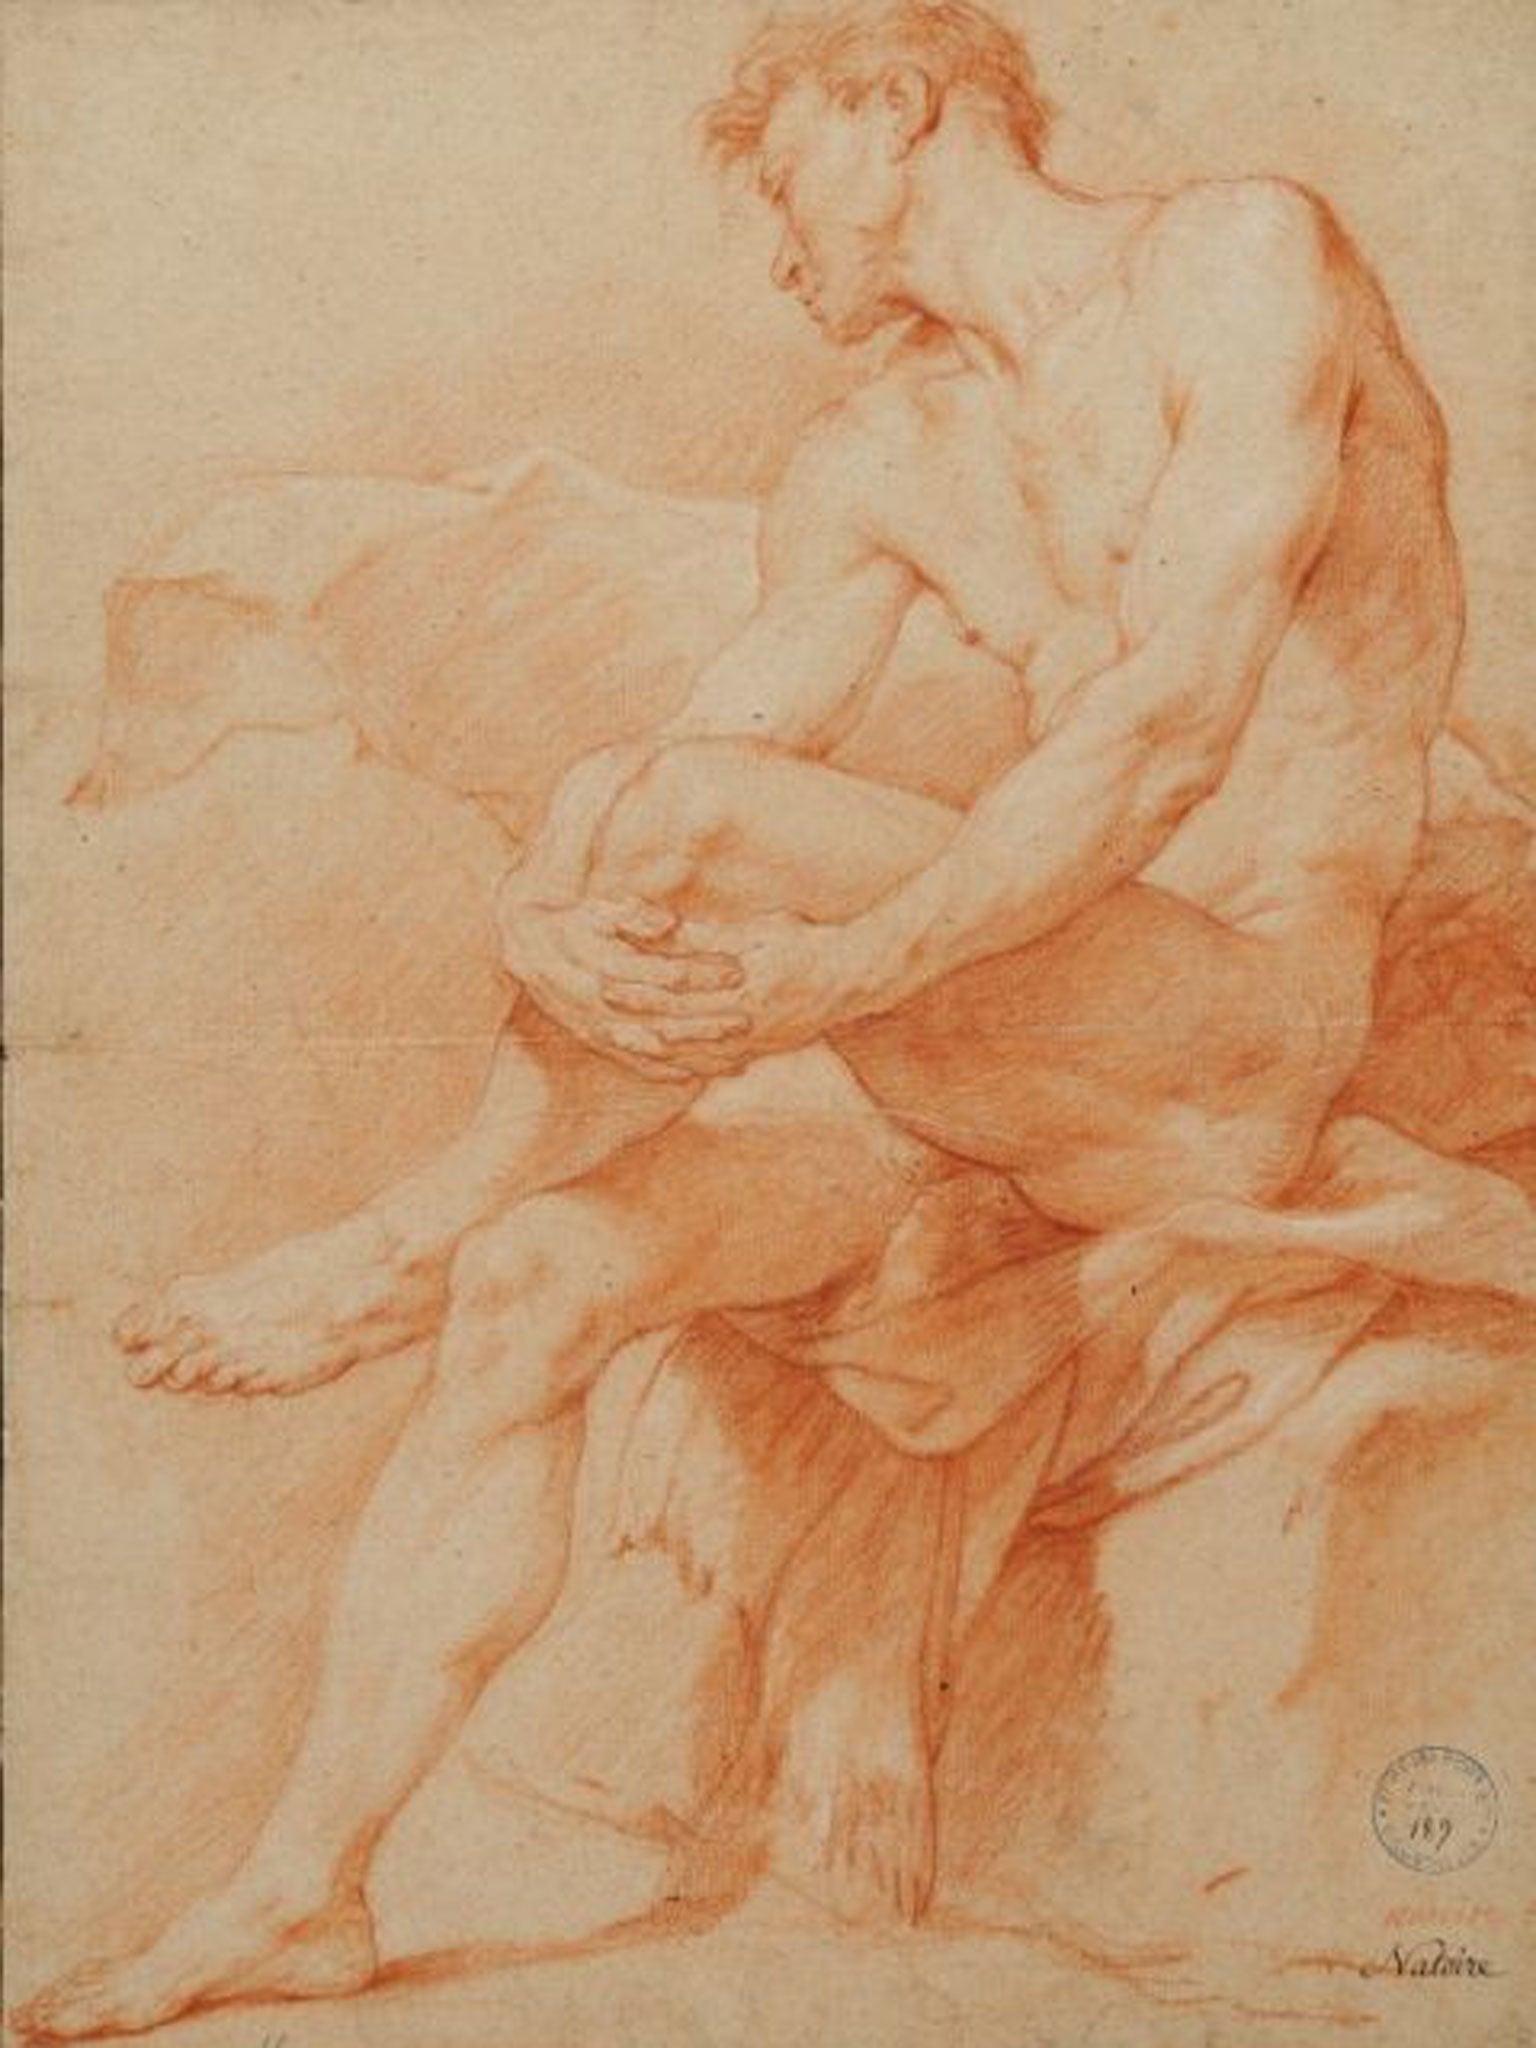 'Seated Male, holding left knee, left profile', by CJ Natoire